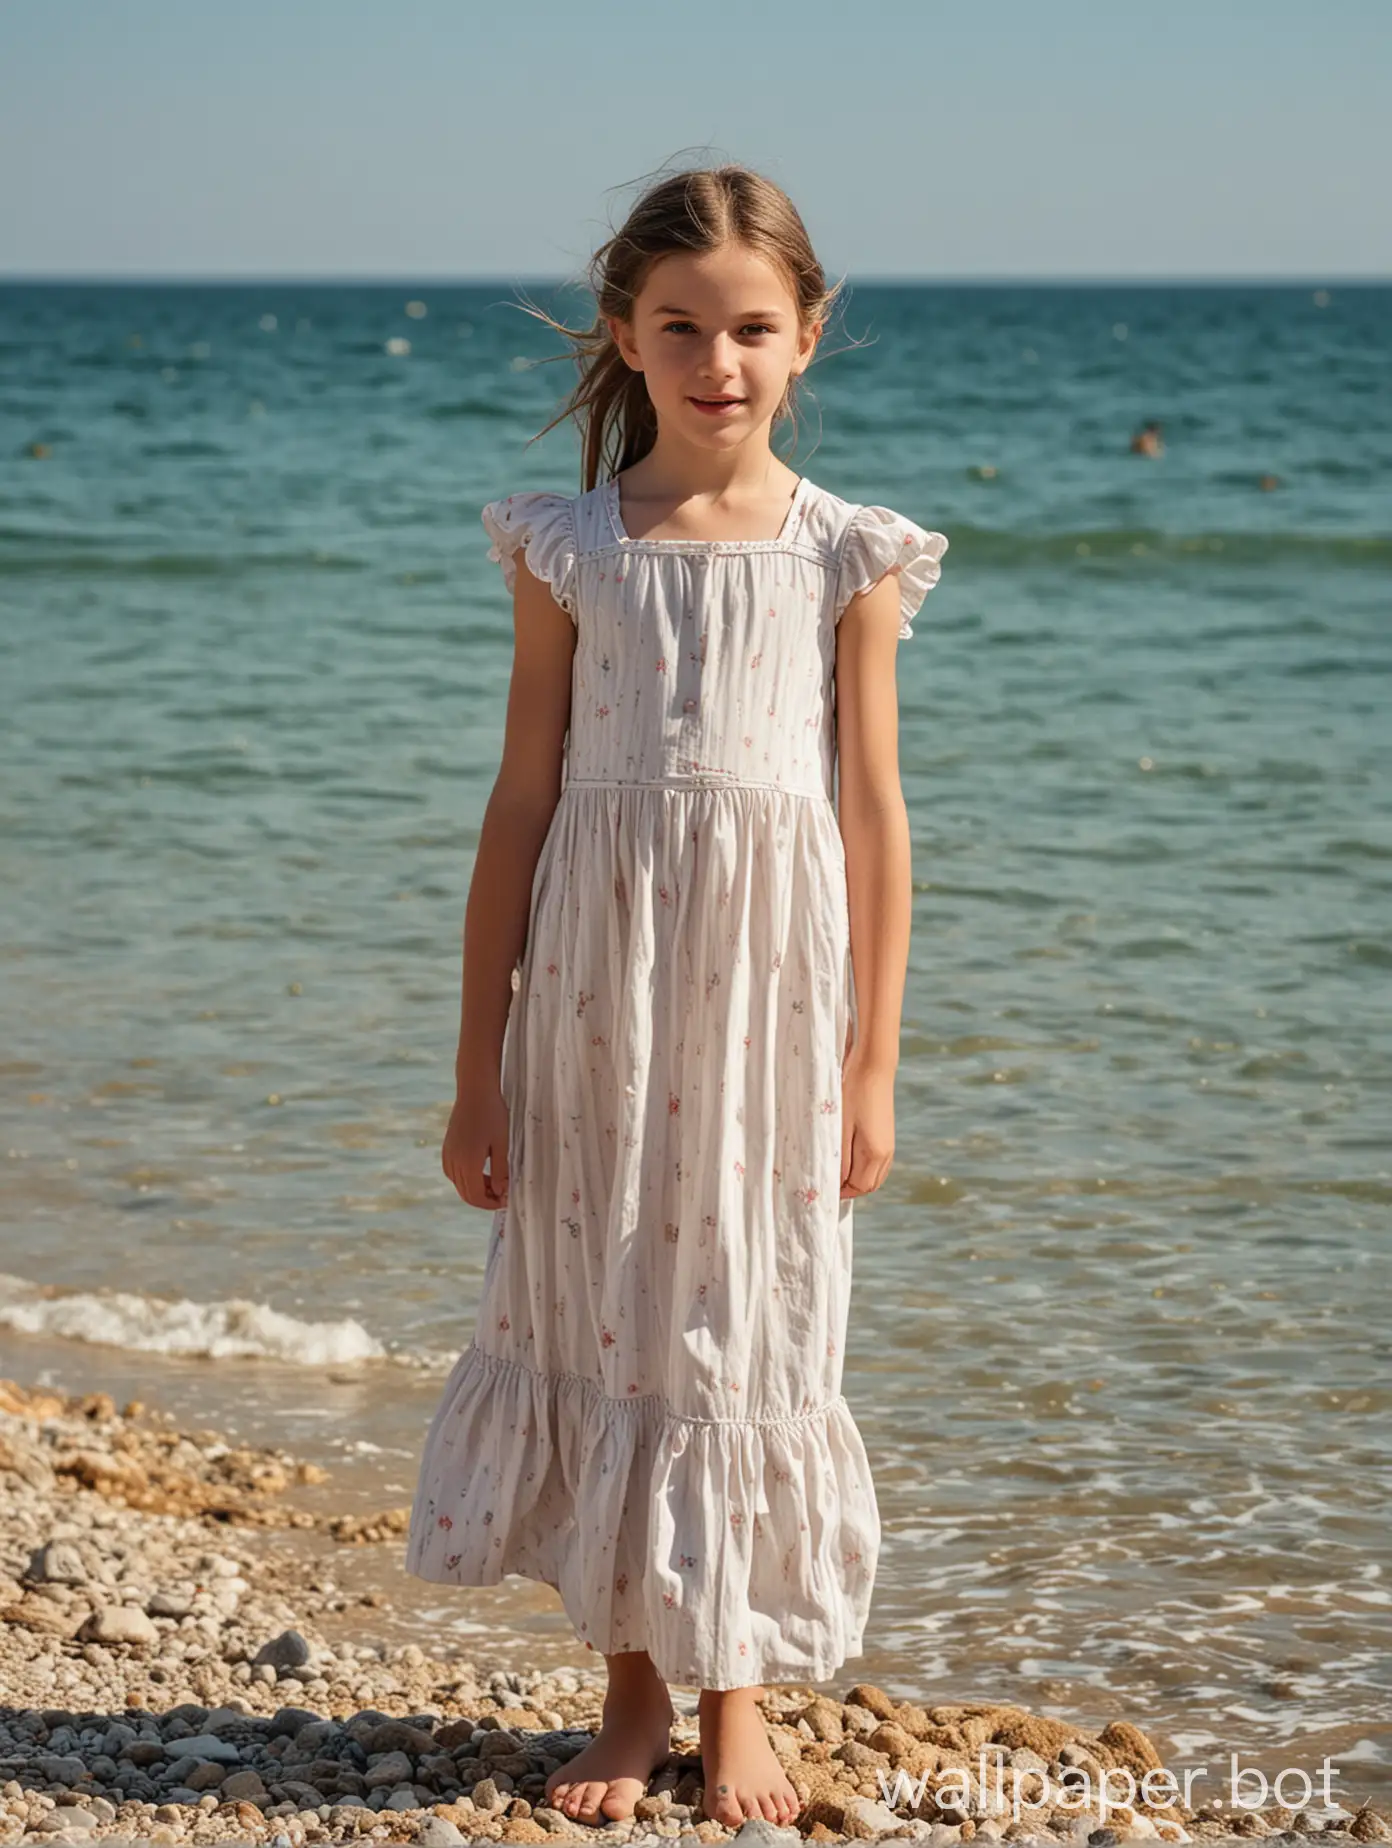 Young-Girl-by-the-Sea-in-France-Dynamic-Pose-and-Coquettish-Stance